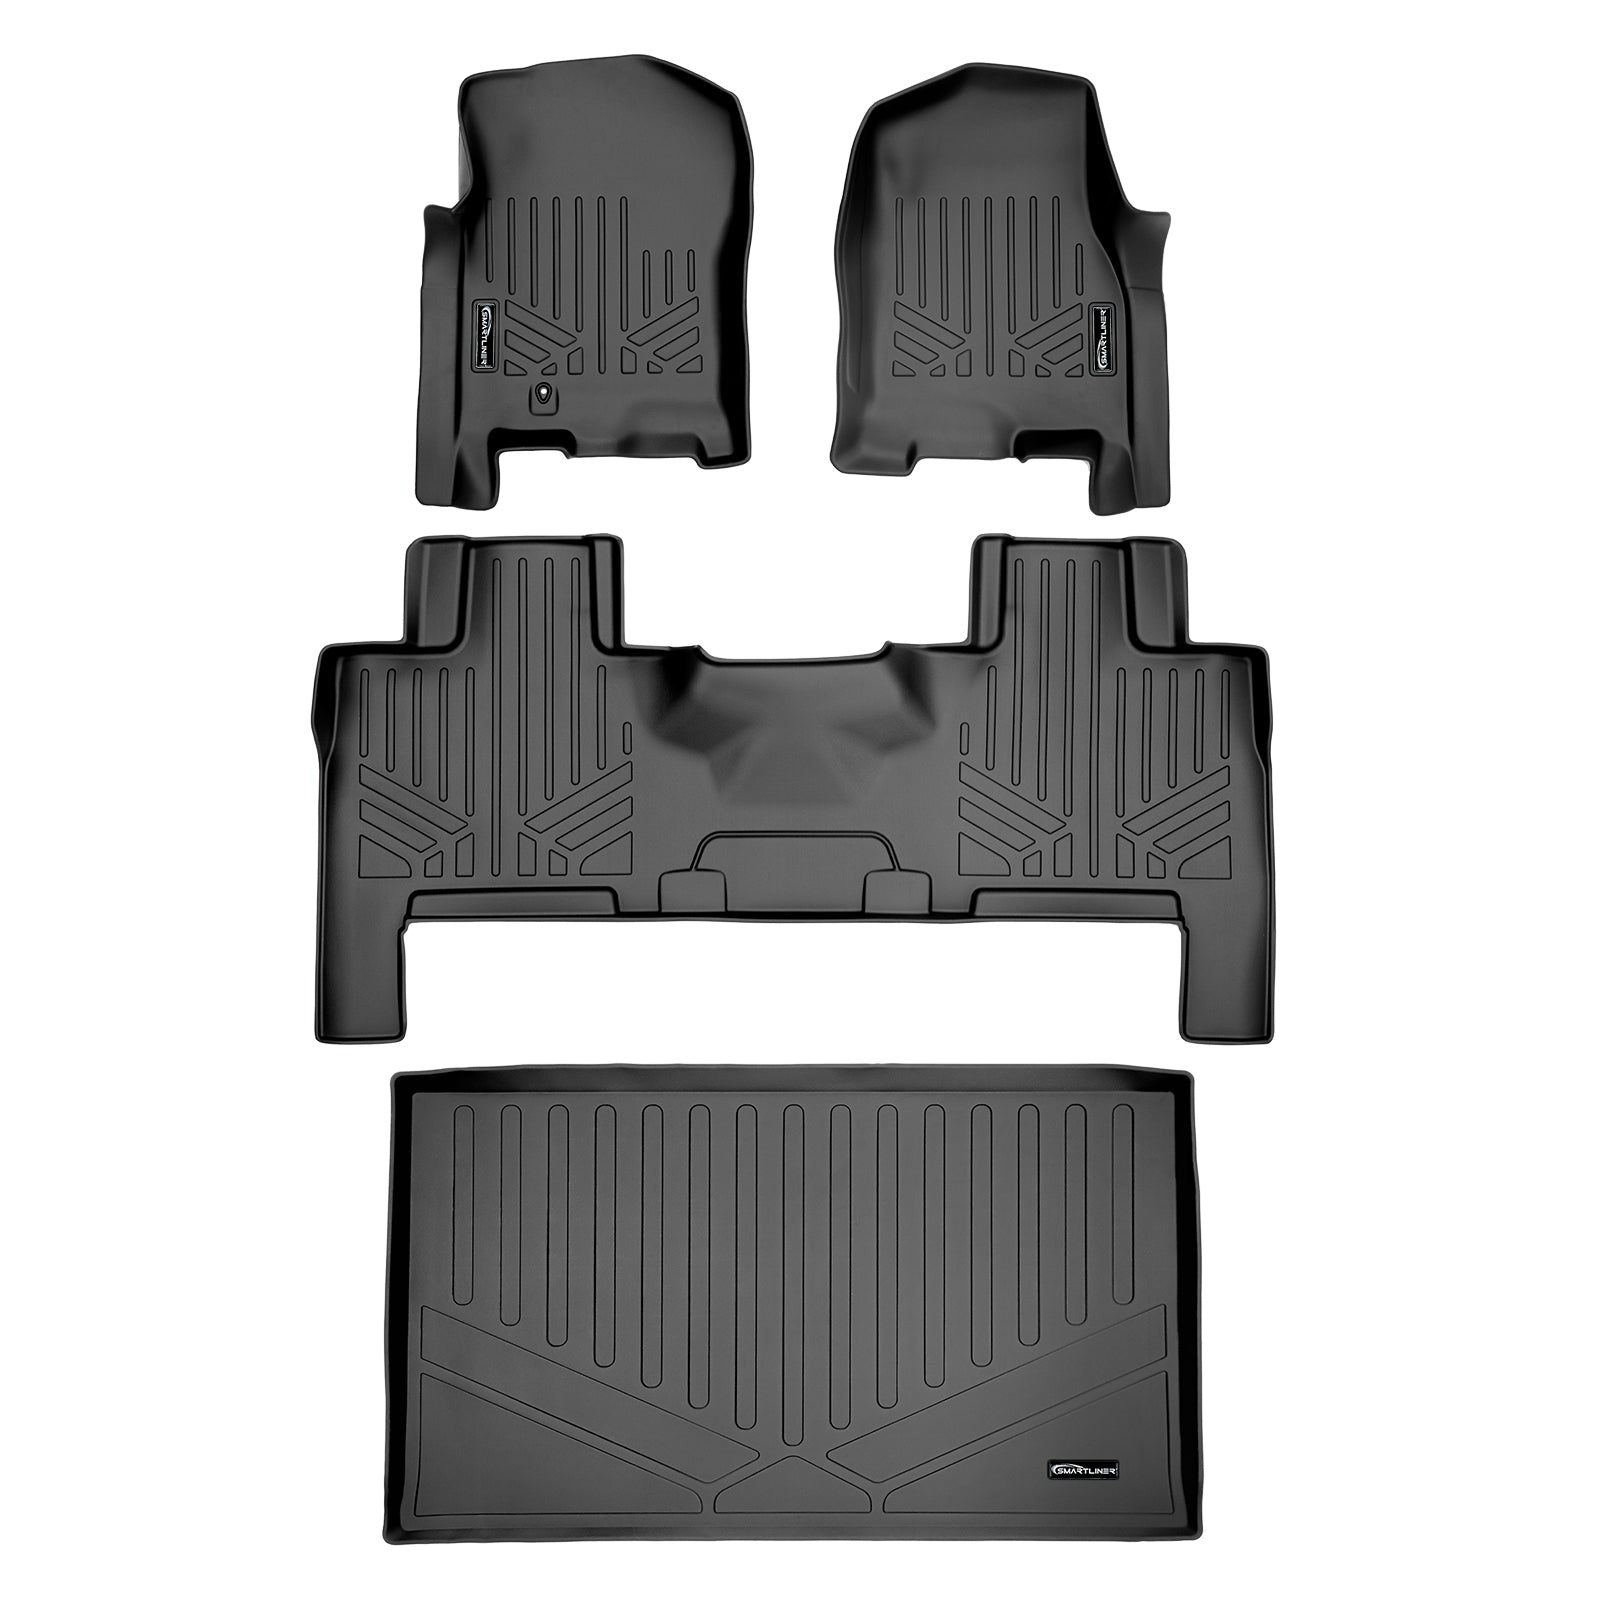 SMARTLINER Custom Fit for 07-10 Expedition EL/Navigator L (with 2nd Row Bench Seat or Console) - Smartliner USA